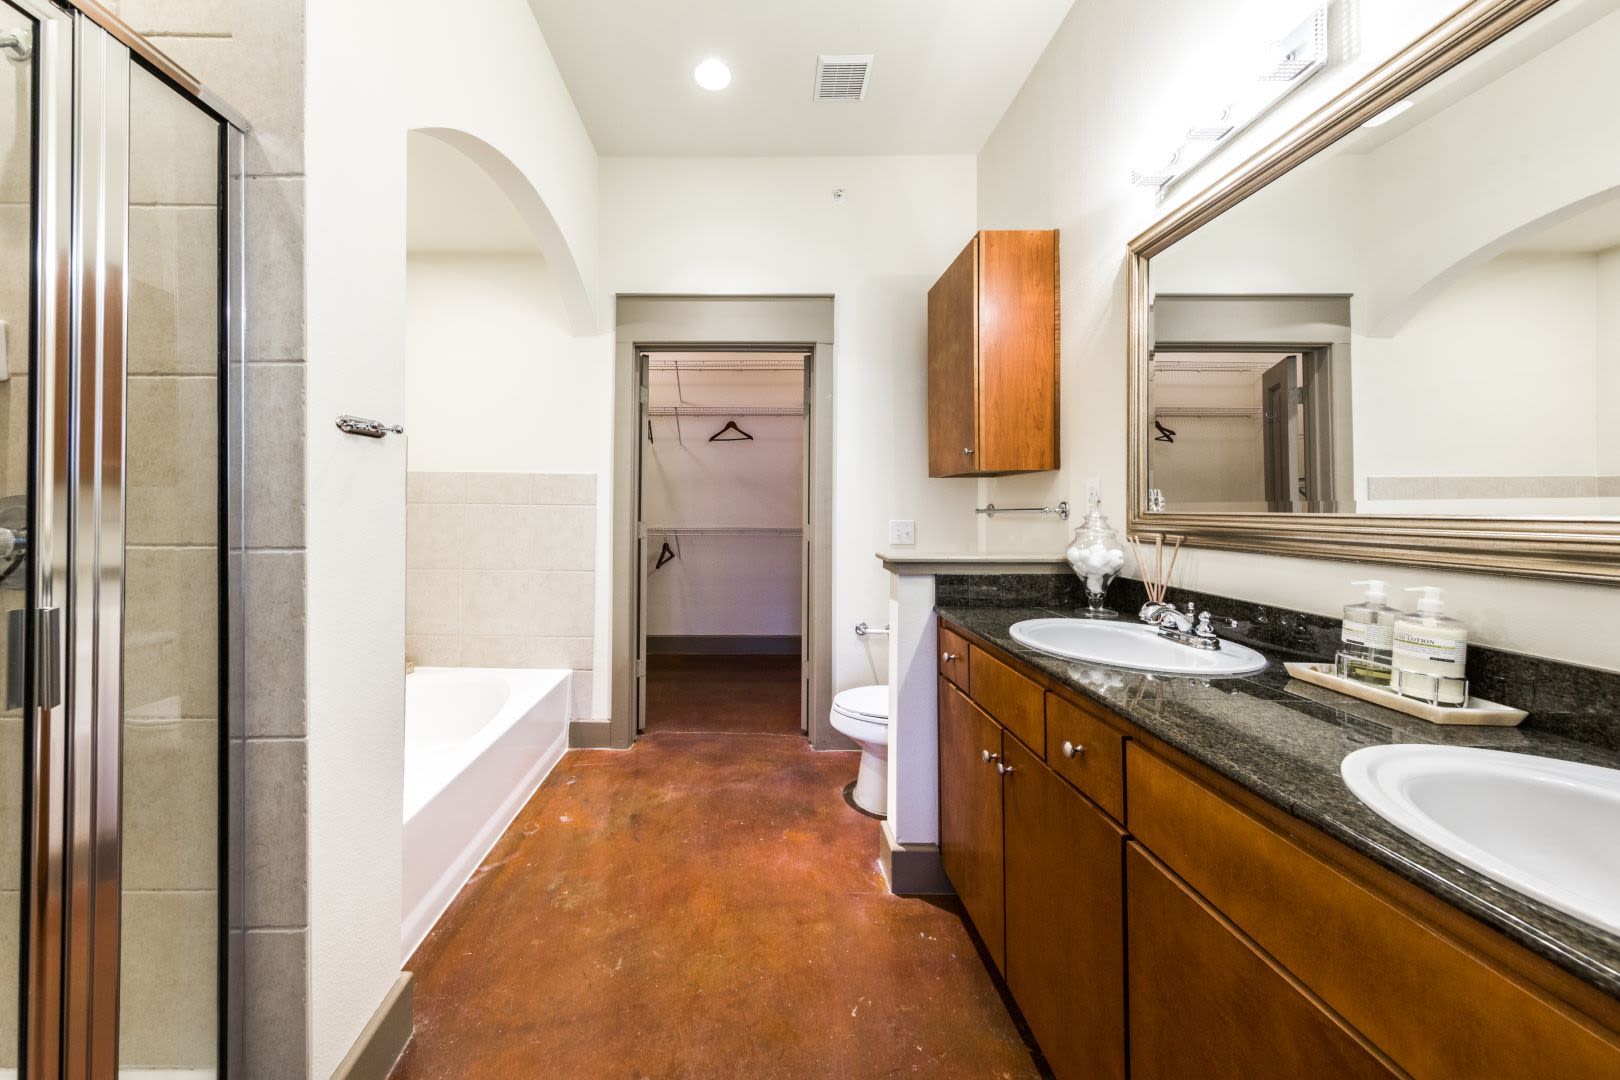 Large bathroom with an attached closet at Marquis Lofts on Sabine in Houston, Texas